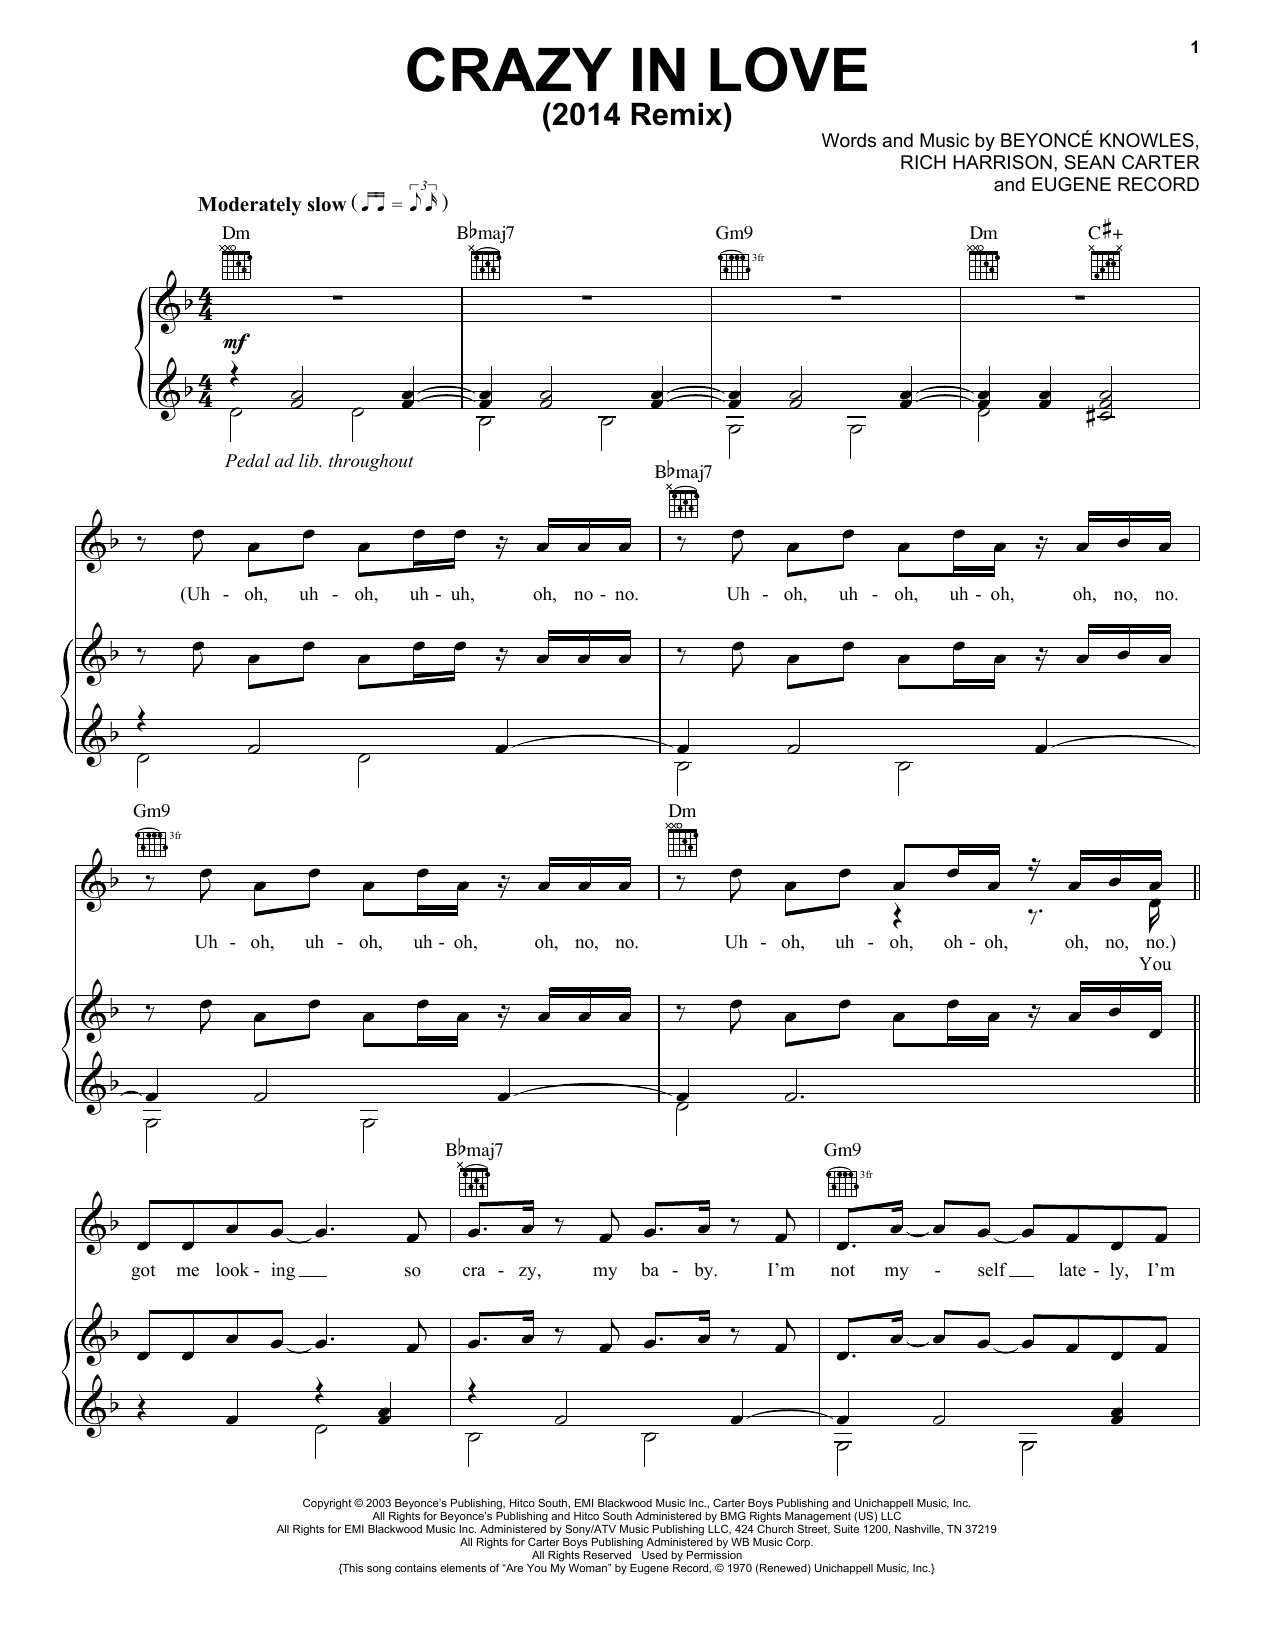 Beyoncé Crazy In Love (feat. Jay-Z) sheet music notes and chords. Download Printable PDF.